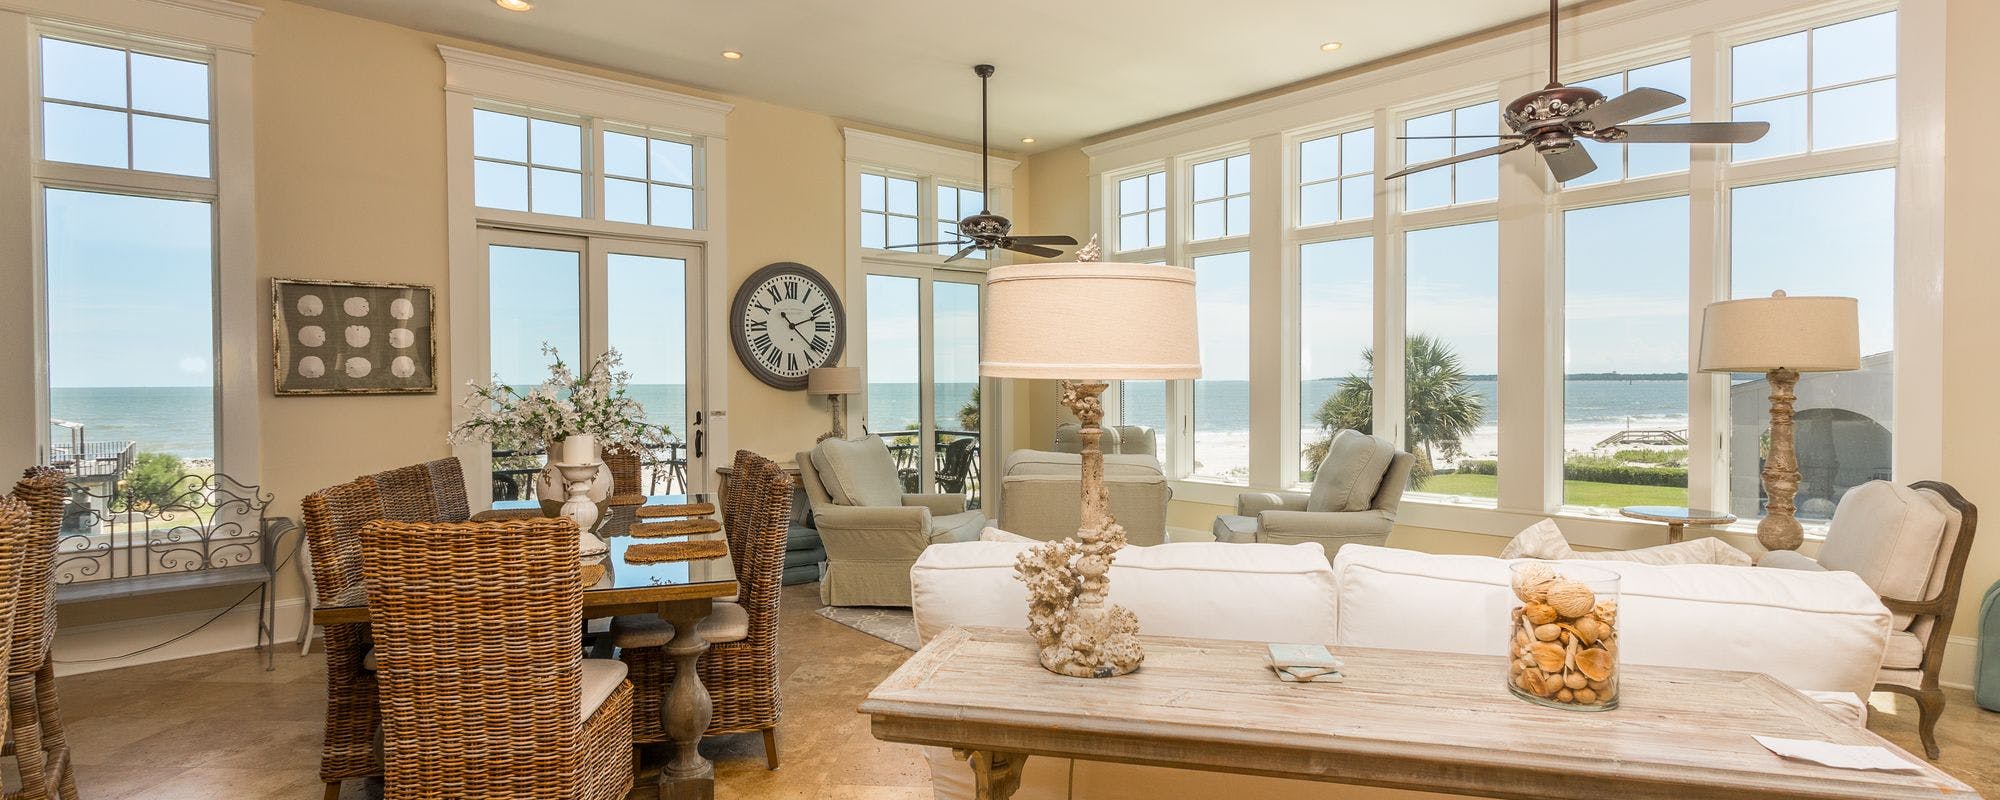 St. Simons vacation rental home with views